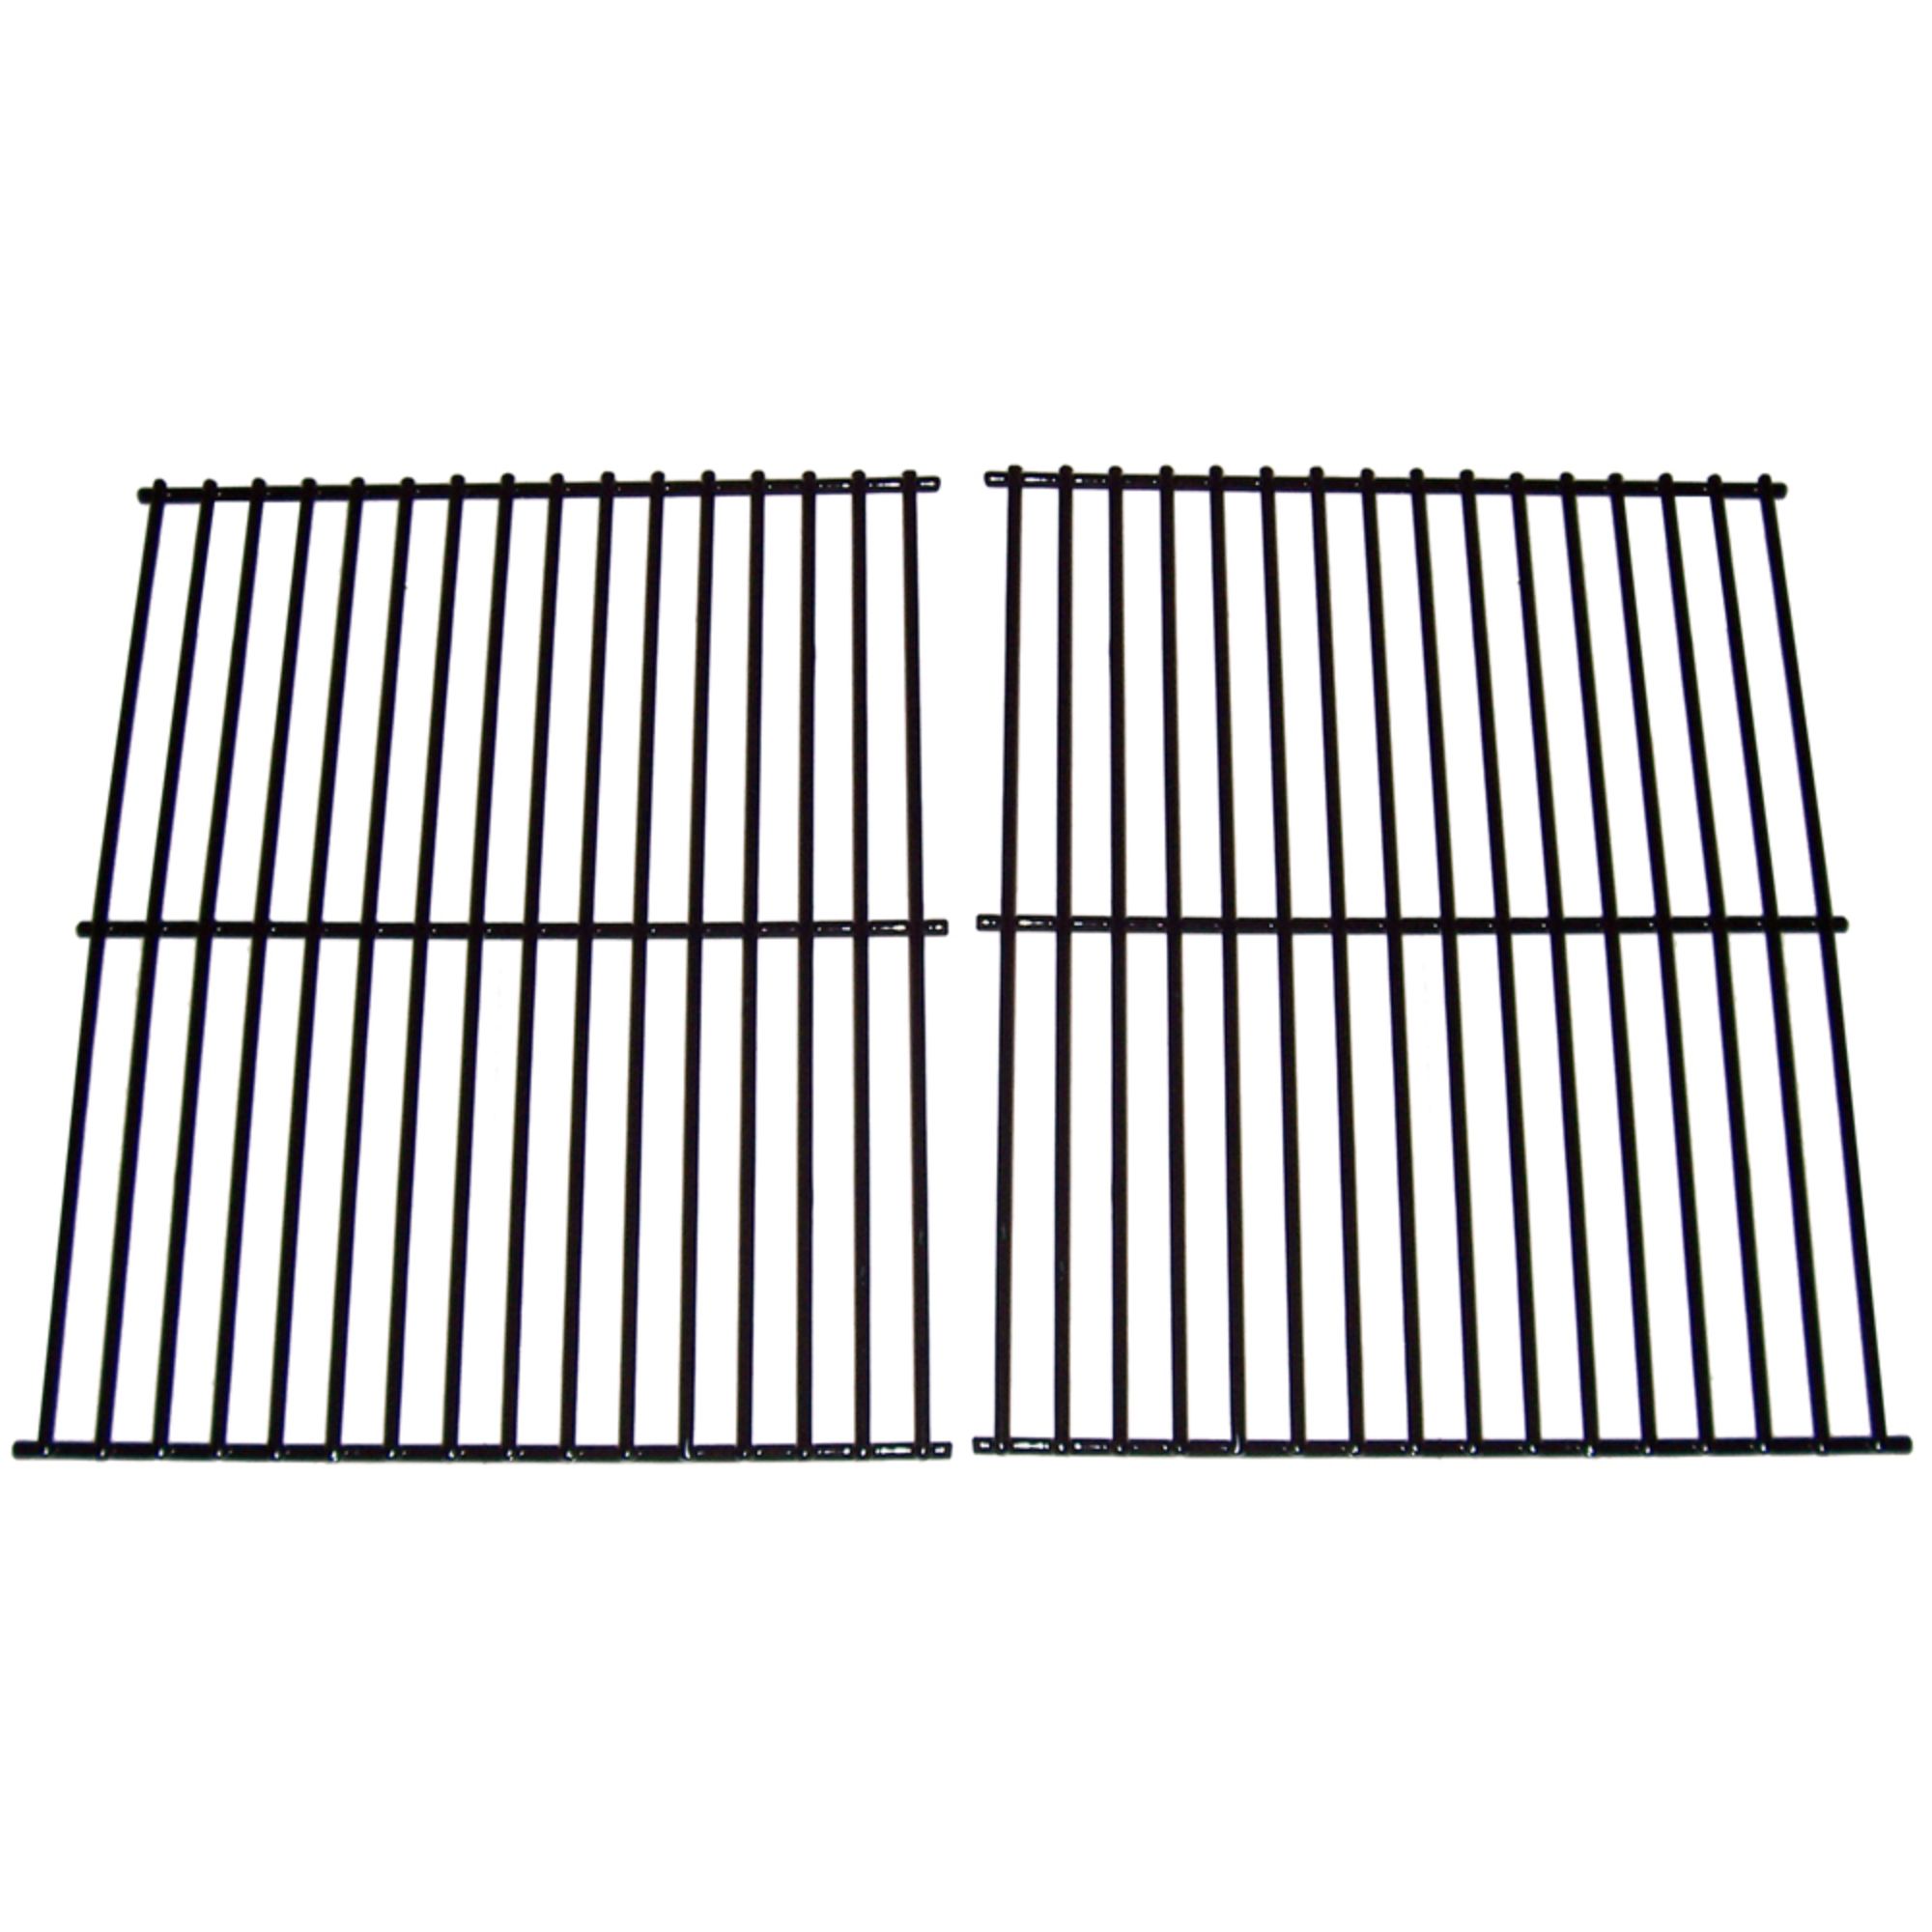 Porcelain steel wire cooking grid for Arkla, Charmglow, Kenmore, Sterling brand gas grills